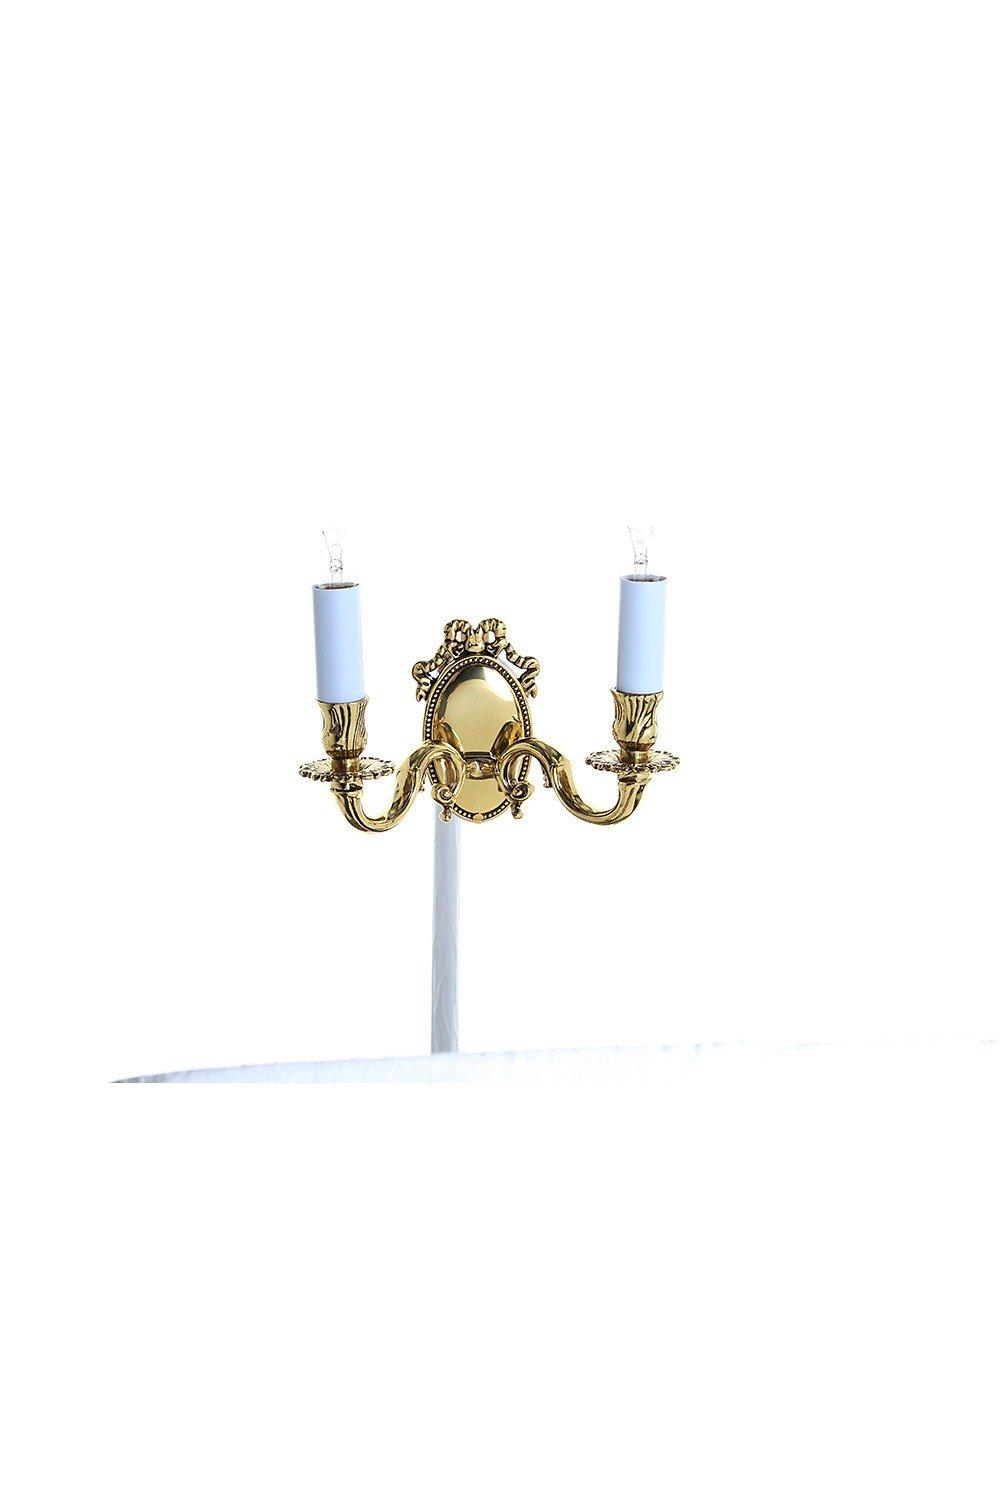 Sandringham Polished Brass Candle Wall Lamp